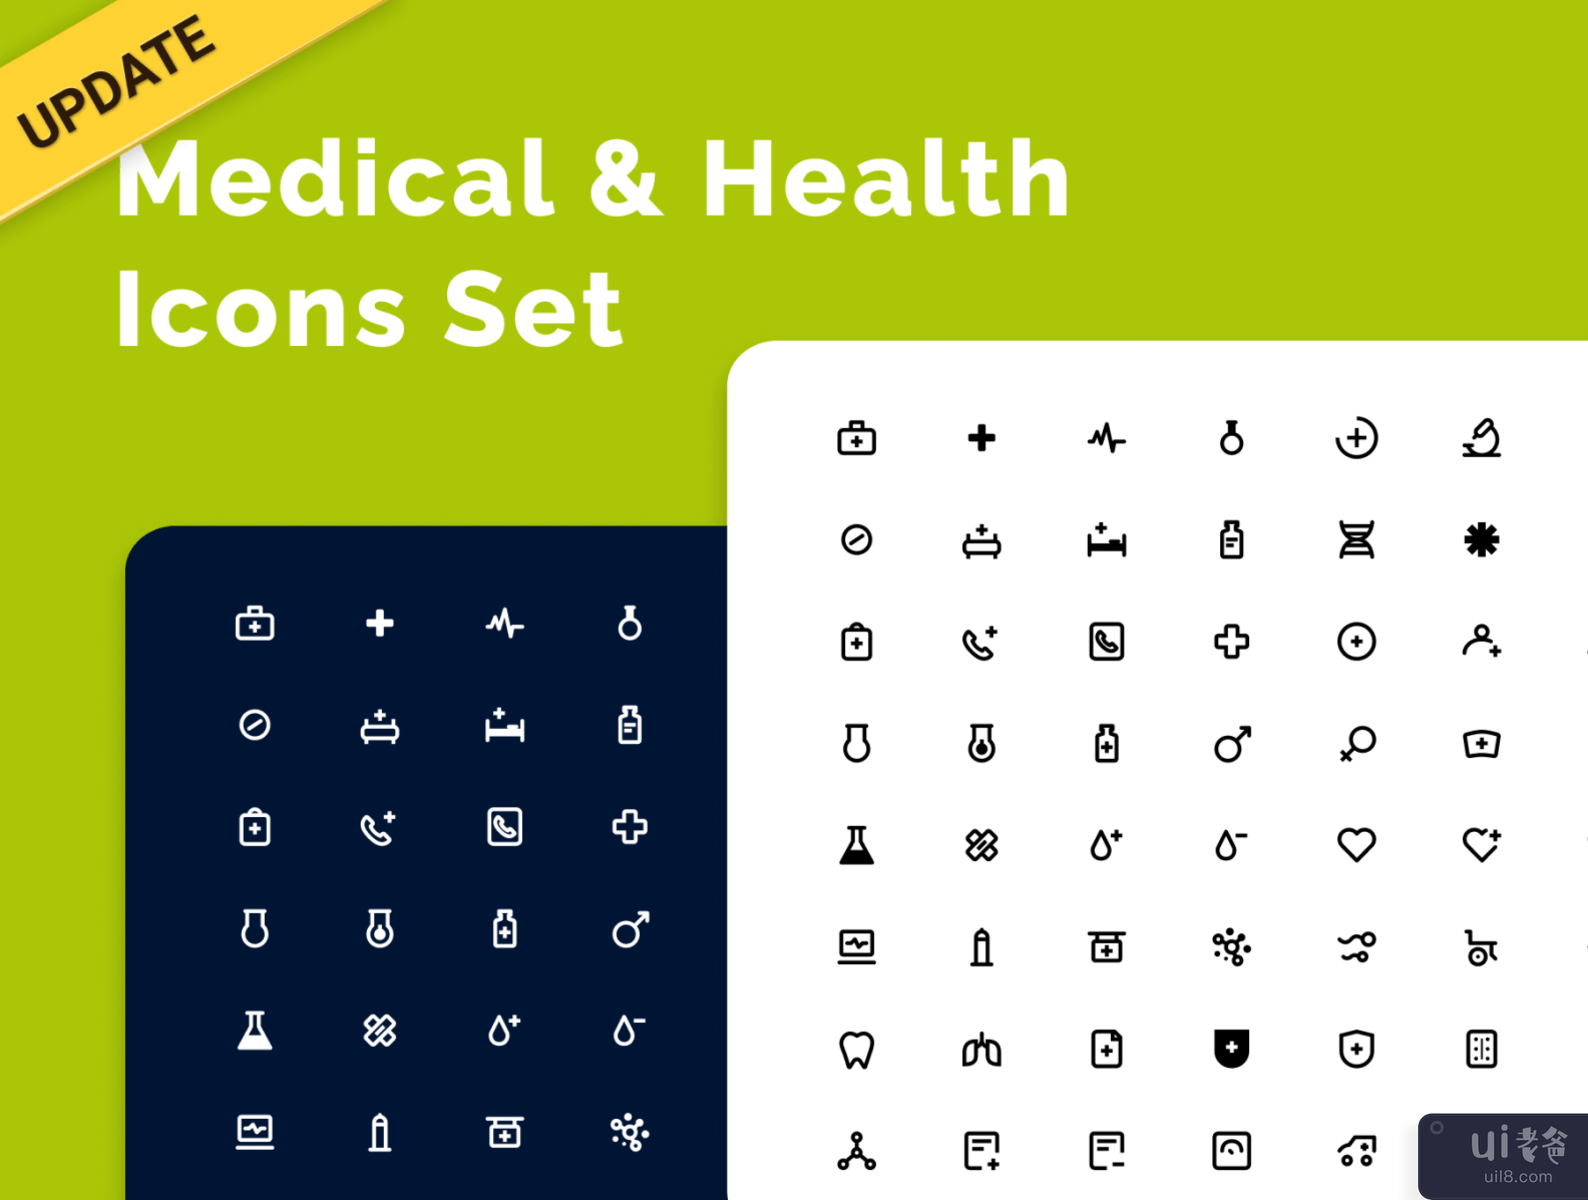 Medical & Health Icons Set - updated!